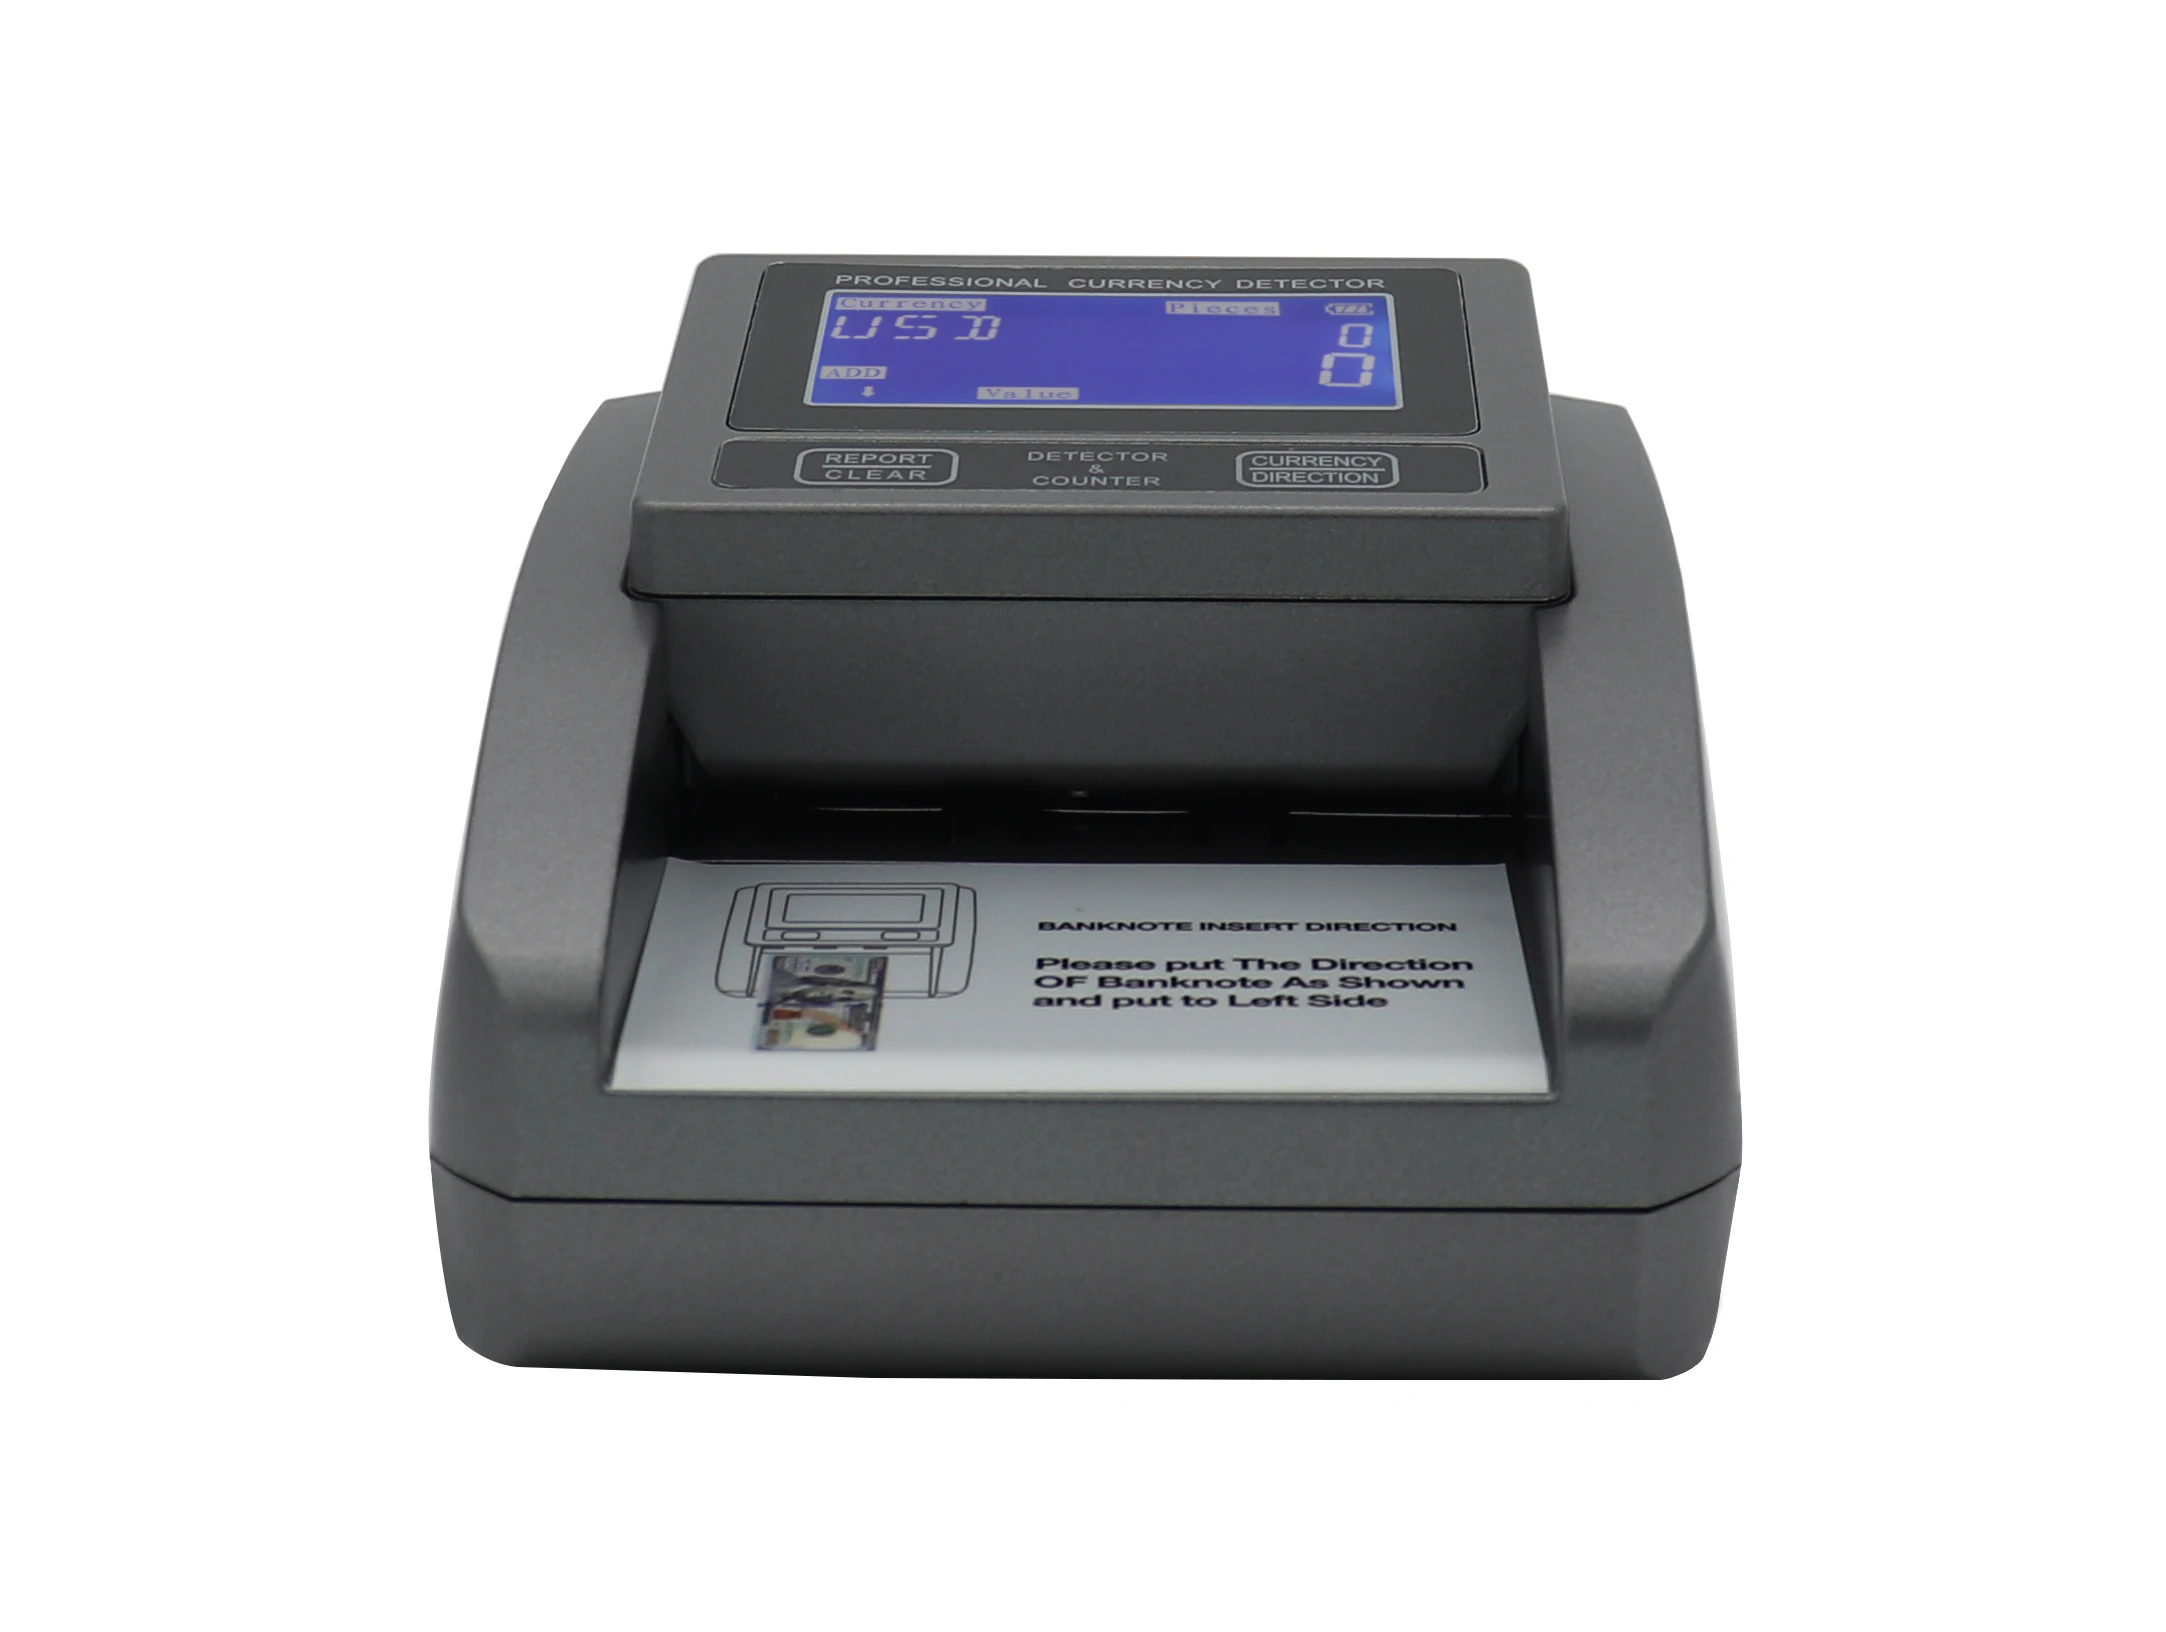 detector billete falso portable battery money counter machine money counter with serial number printer portable banknotes